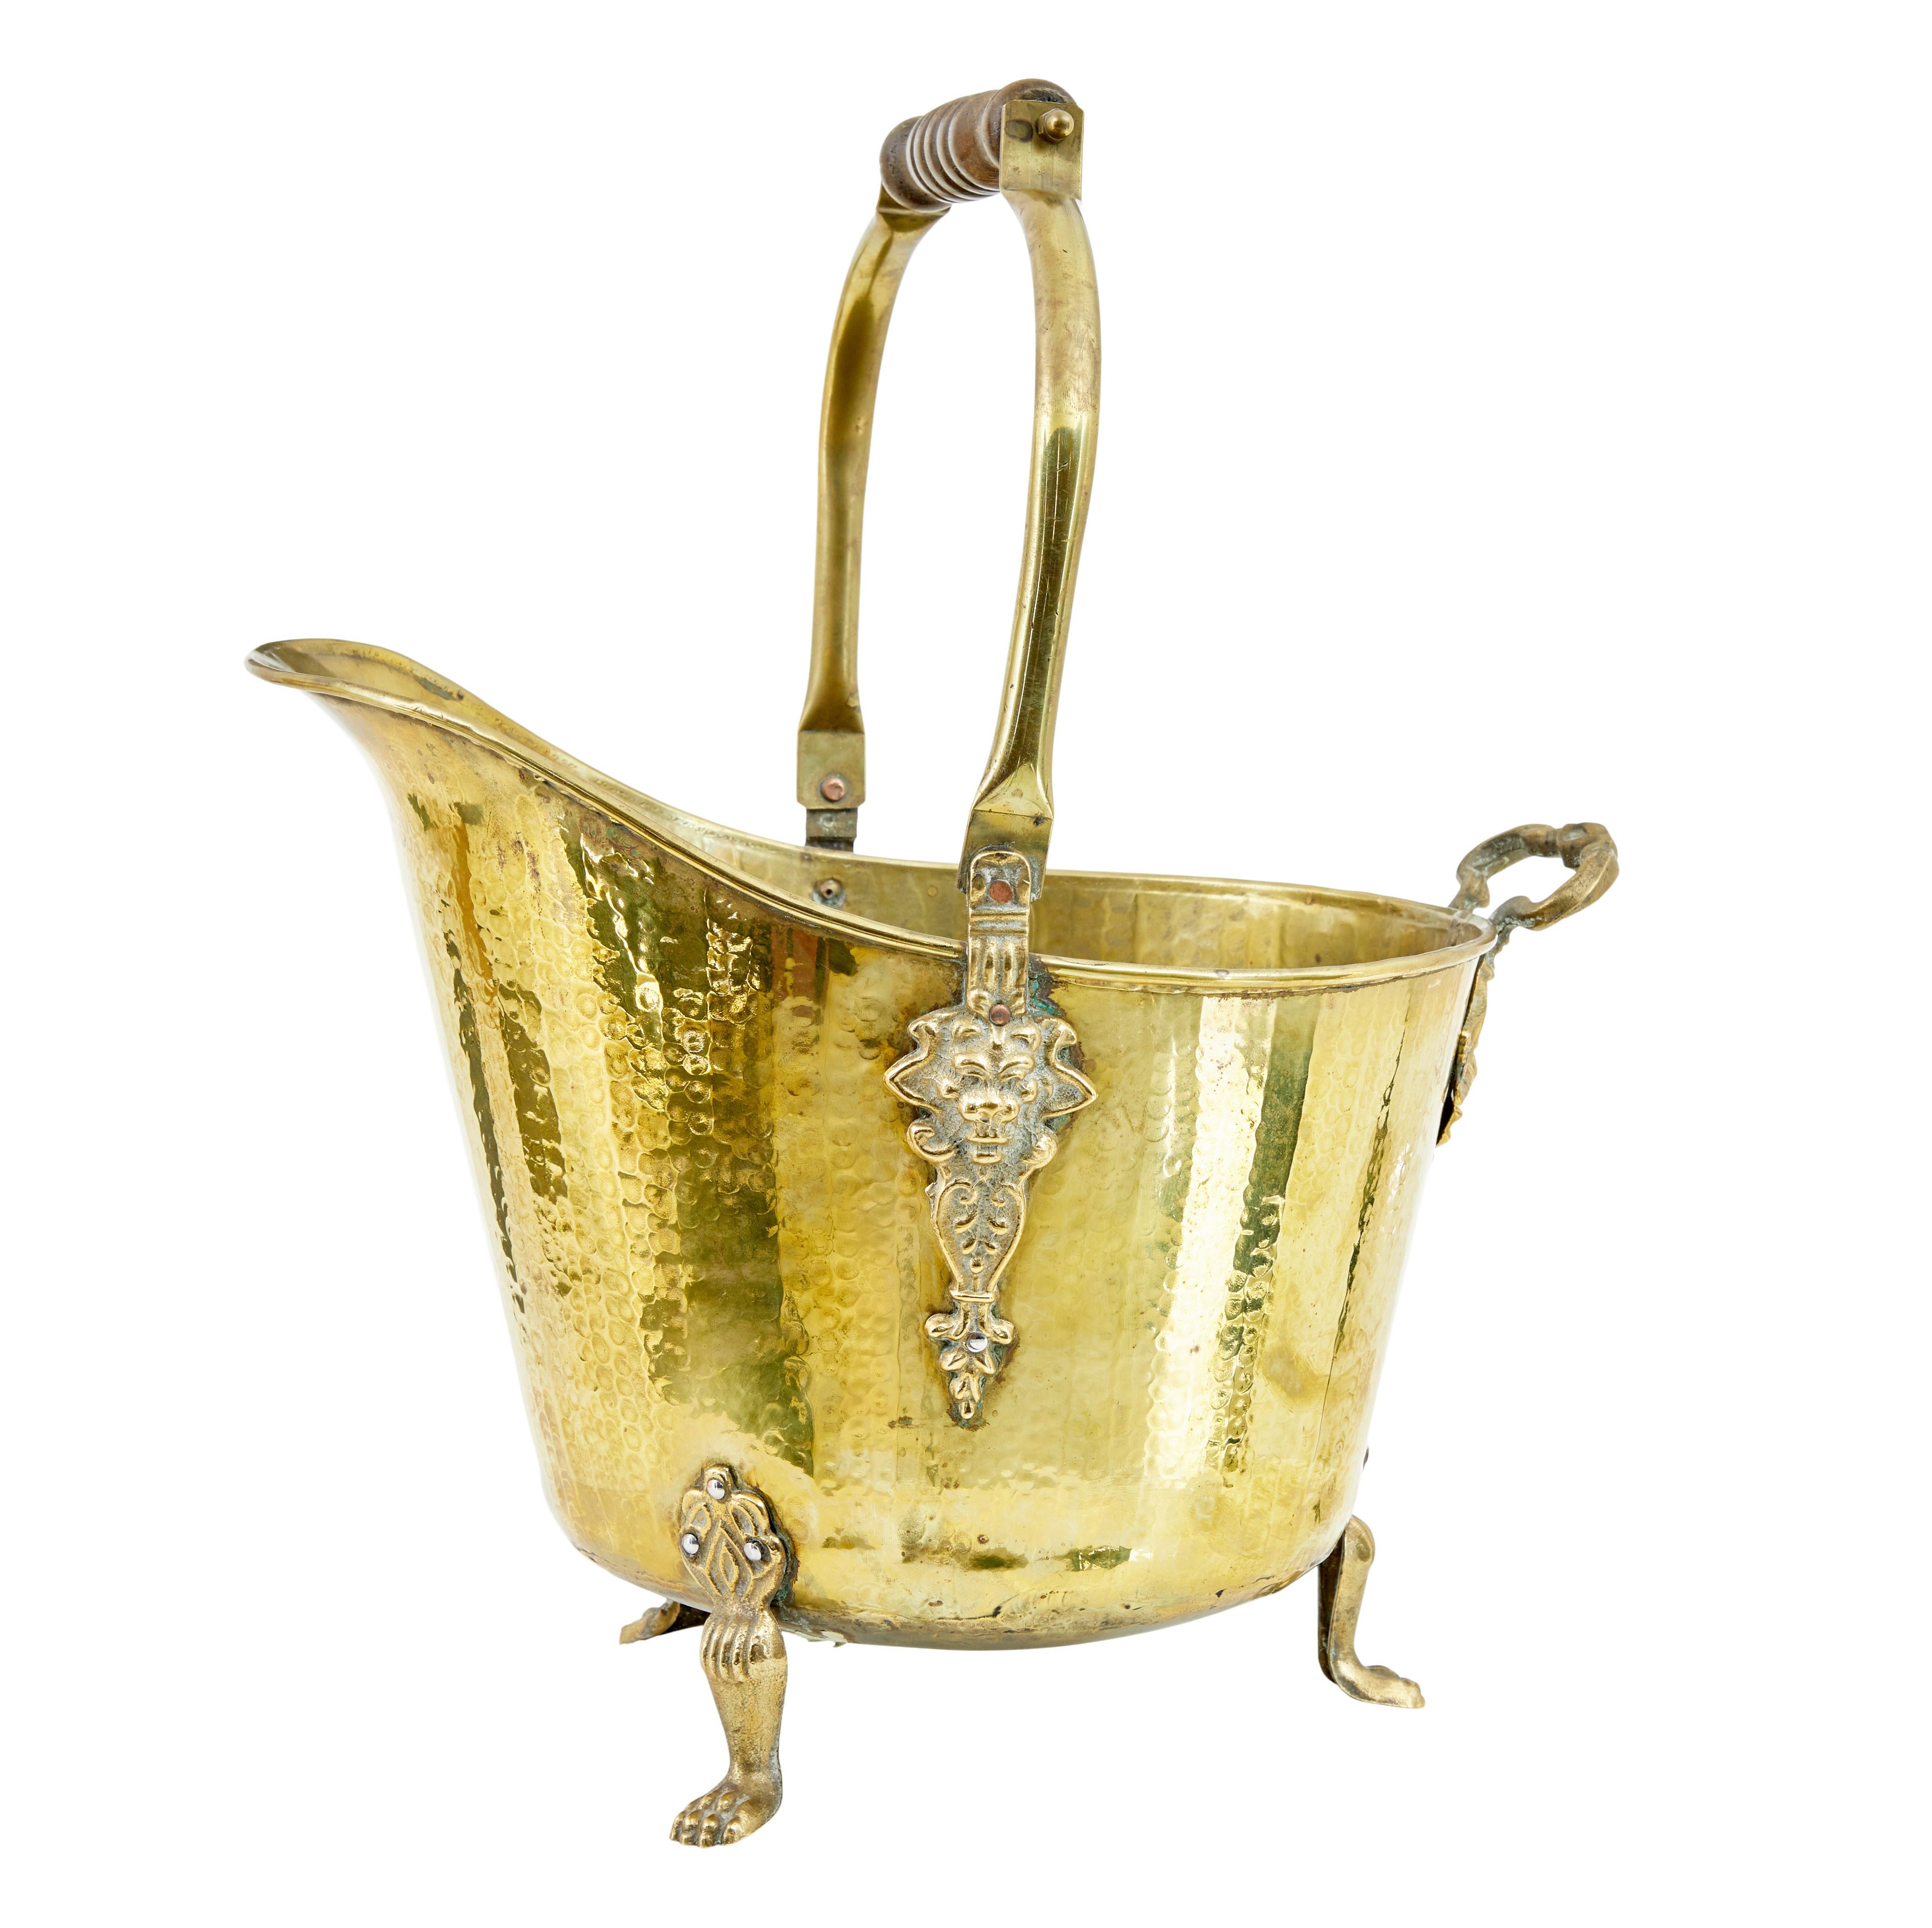 19th century Victorian brass coal scuttle circa 1890.

Decorative cast lion brass masks form the supports for the wood and brass handle.
Standing on 3 paw feet, good quality example from the 19th century.

Minor expected surface marks.  Handle with